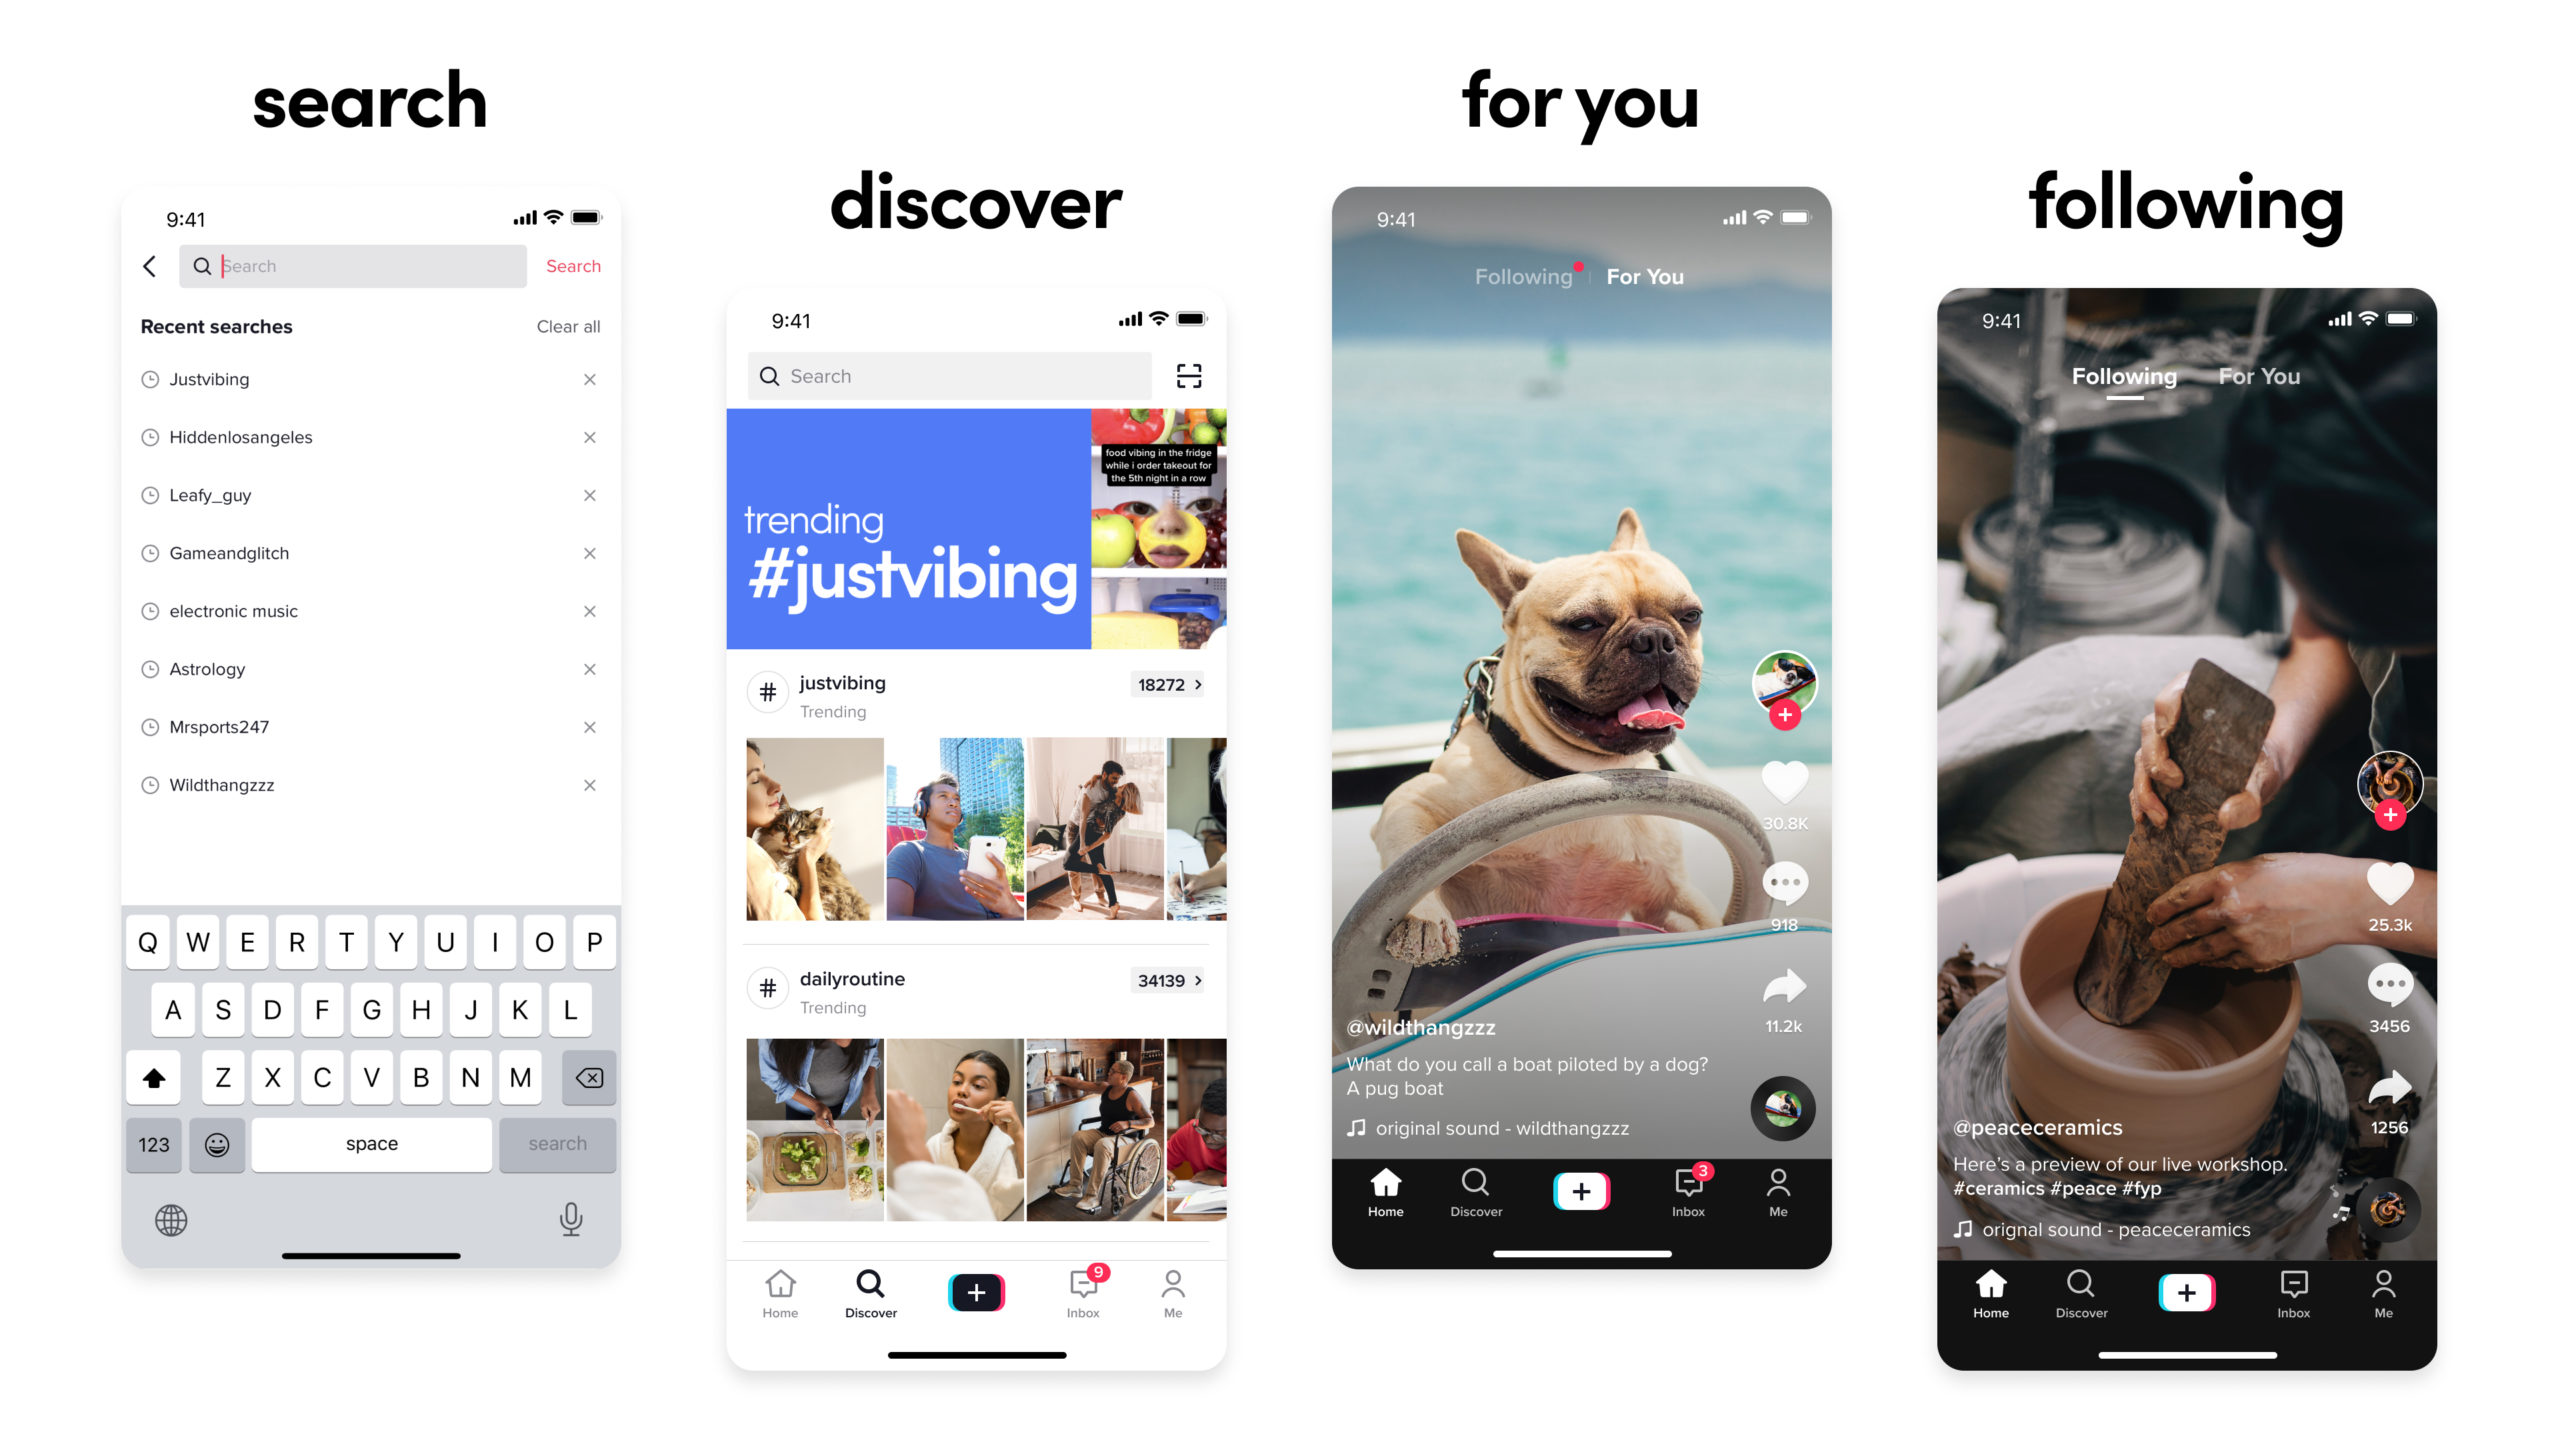 Search, discover, for you and following pages on TikTok